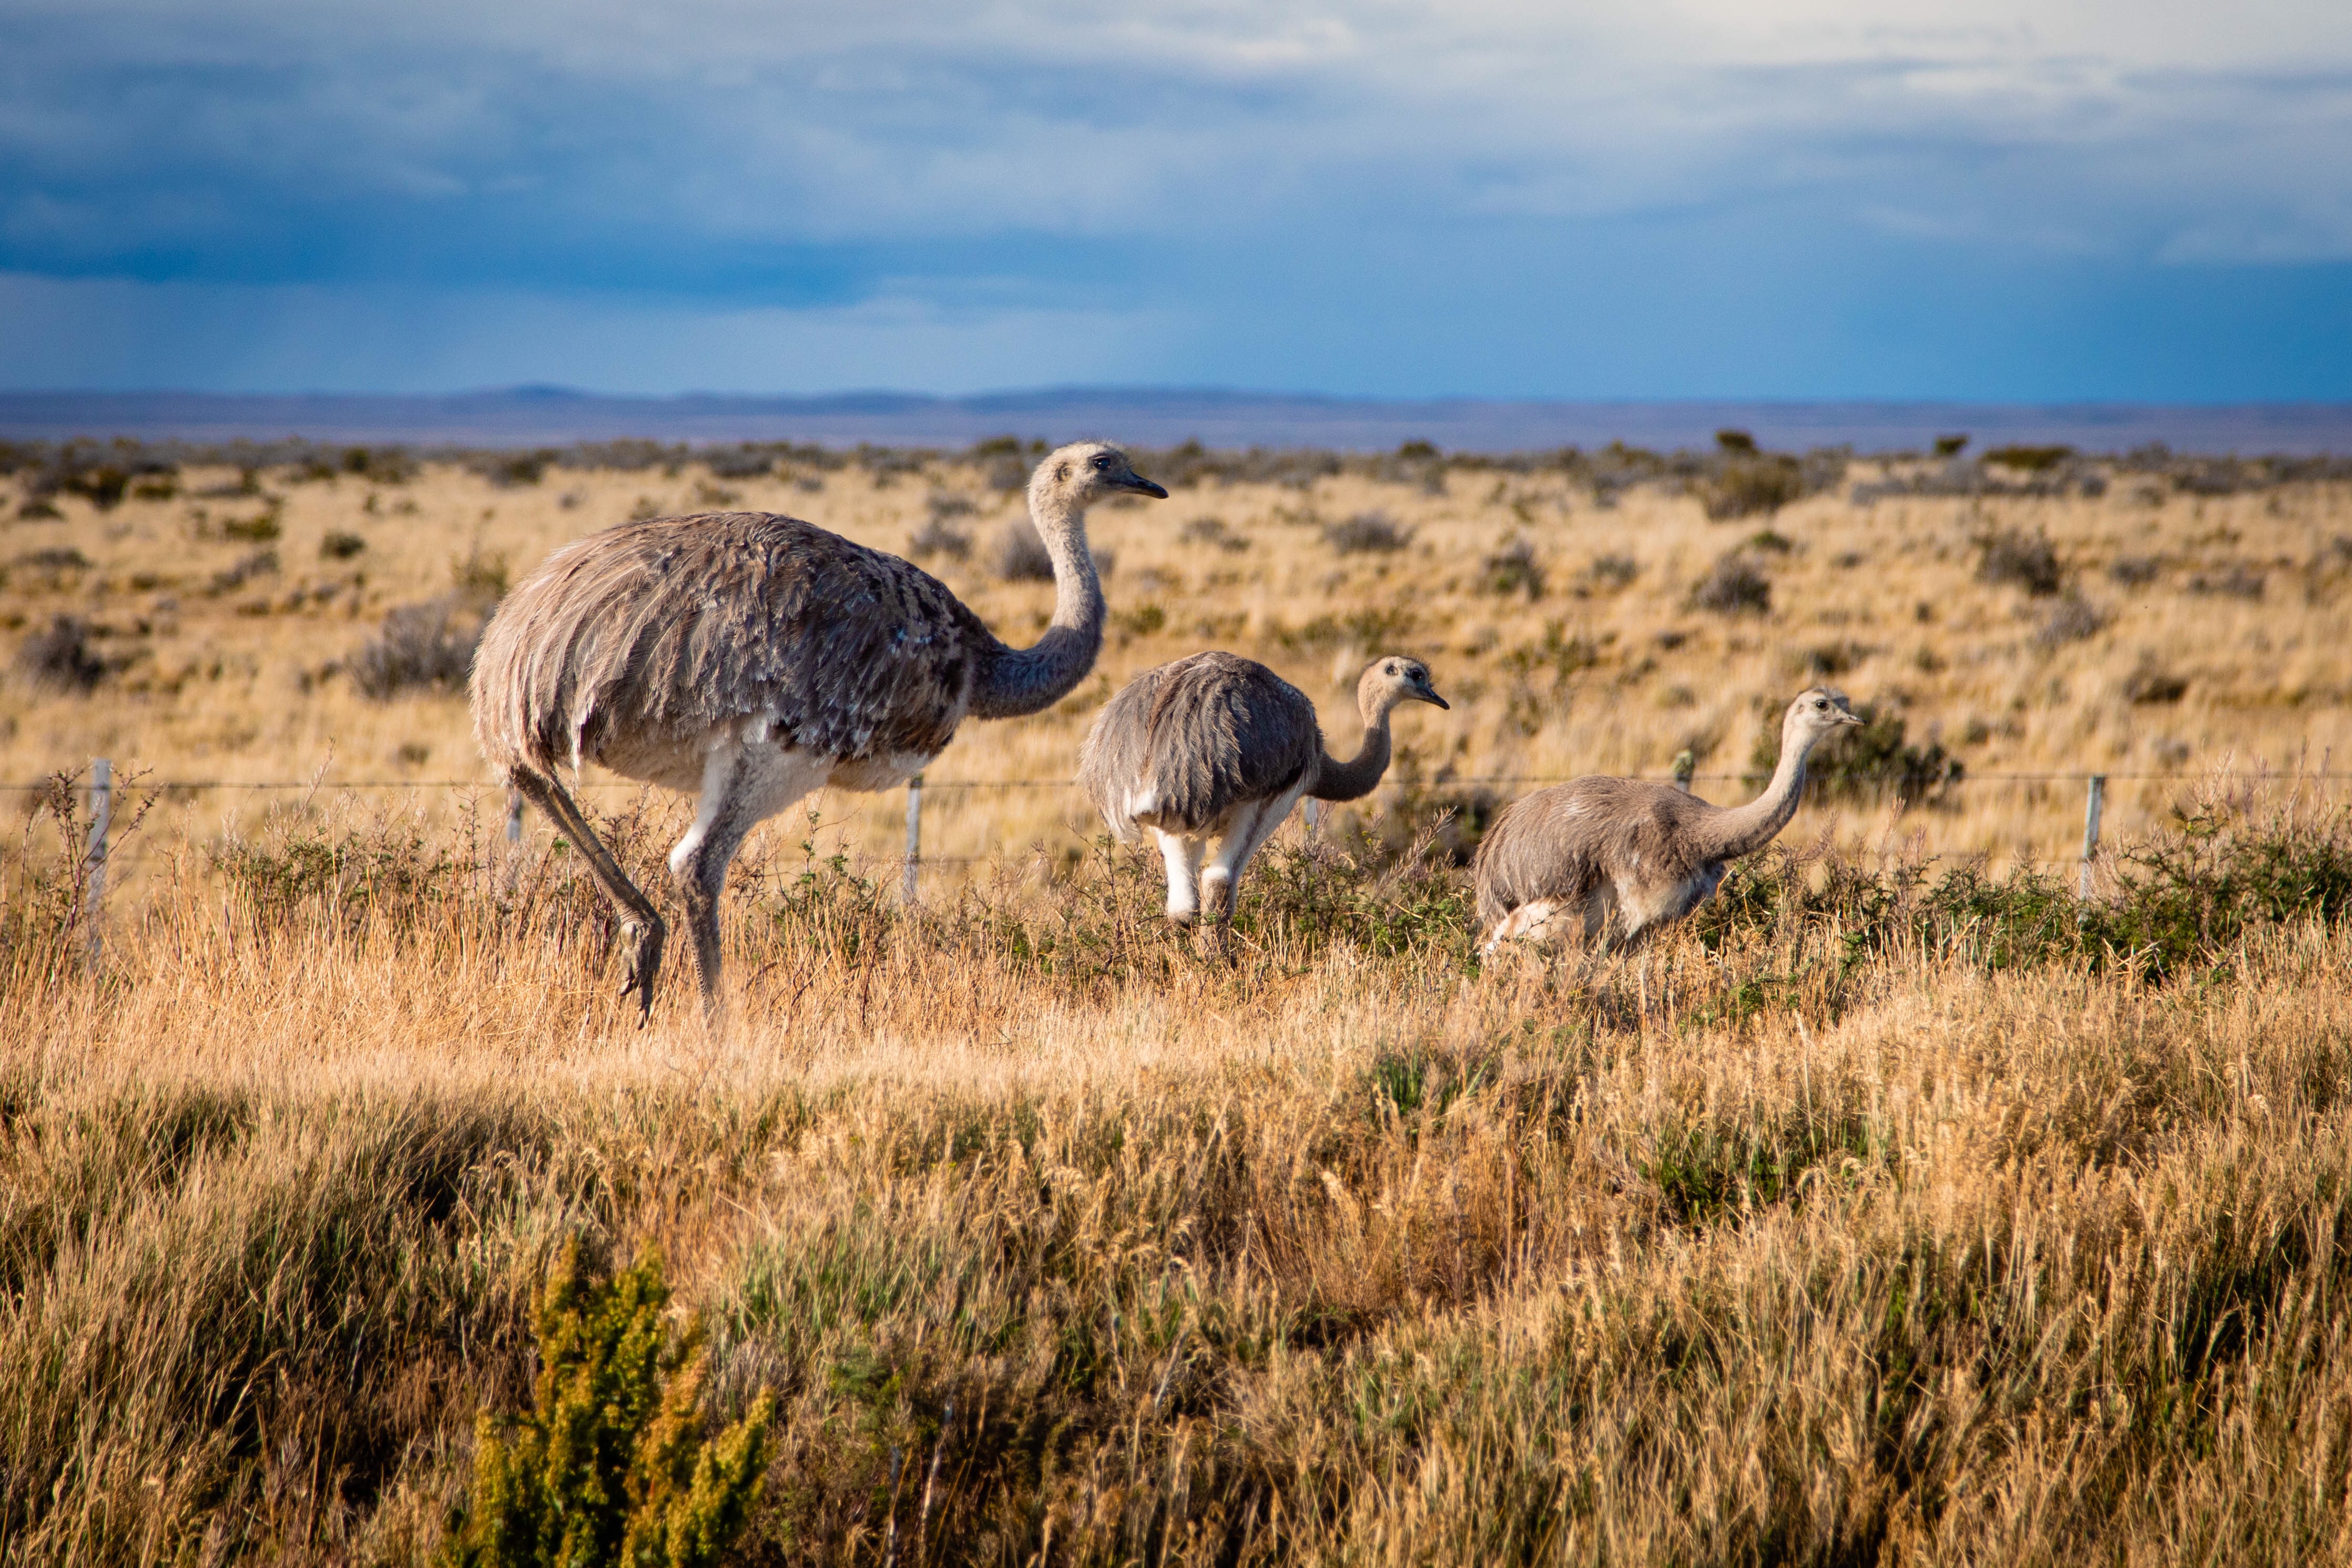 A mother Rhea and her babies on the side of the road in Punta Arenas